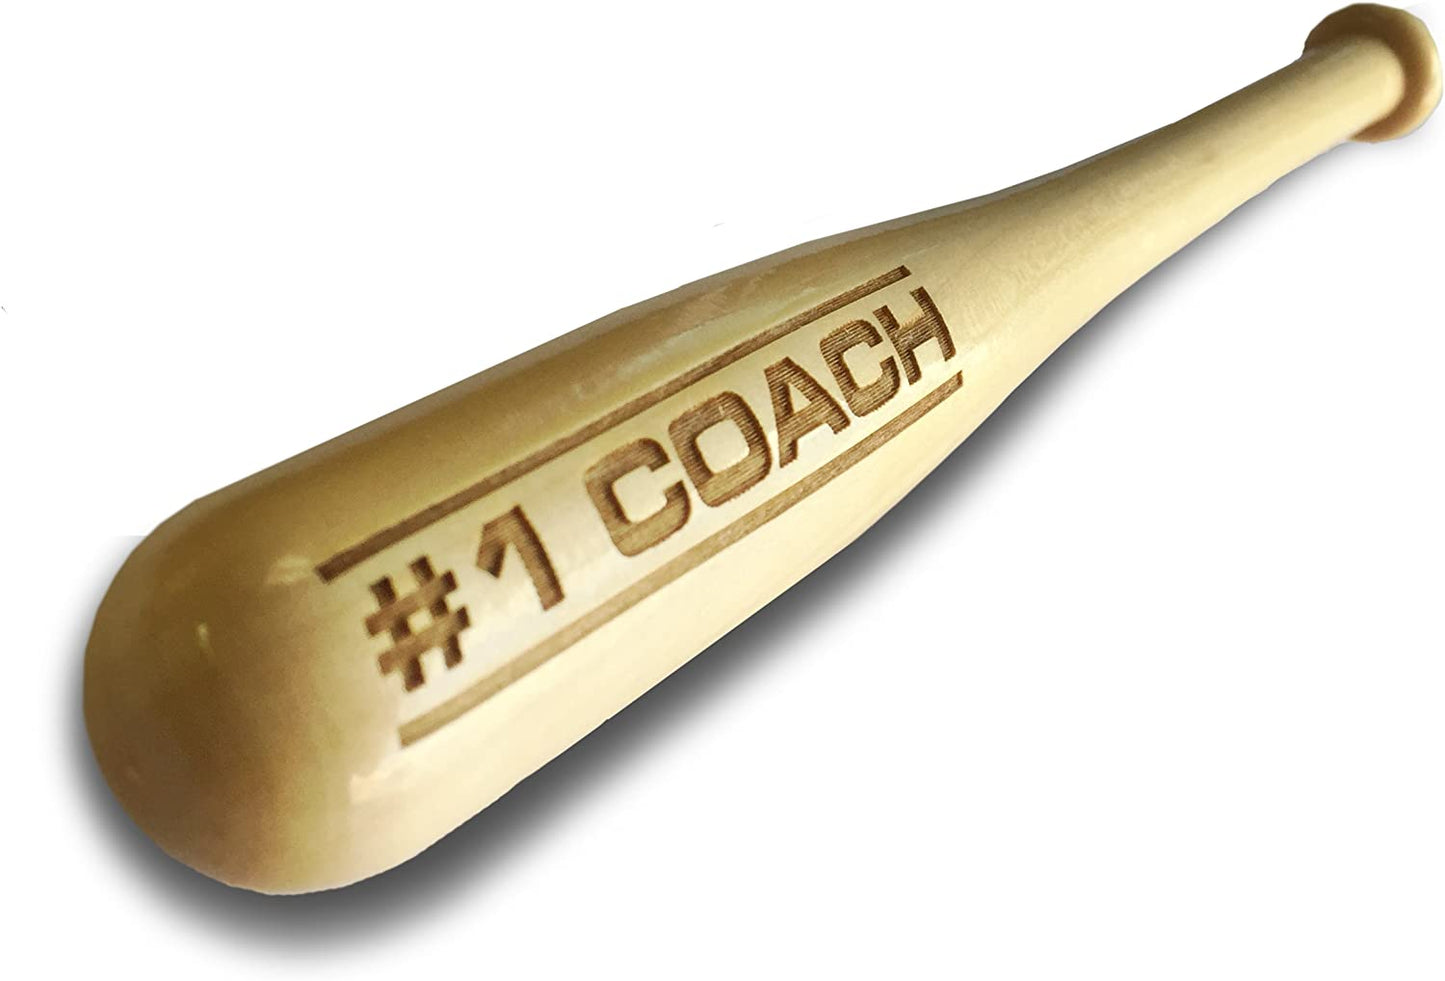 Sports Sayings Engraved Toy Baseball Bat - Multiple Designs and Size Options